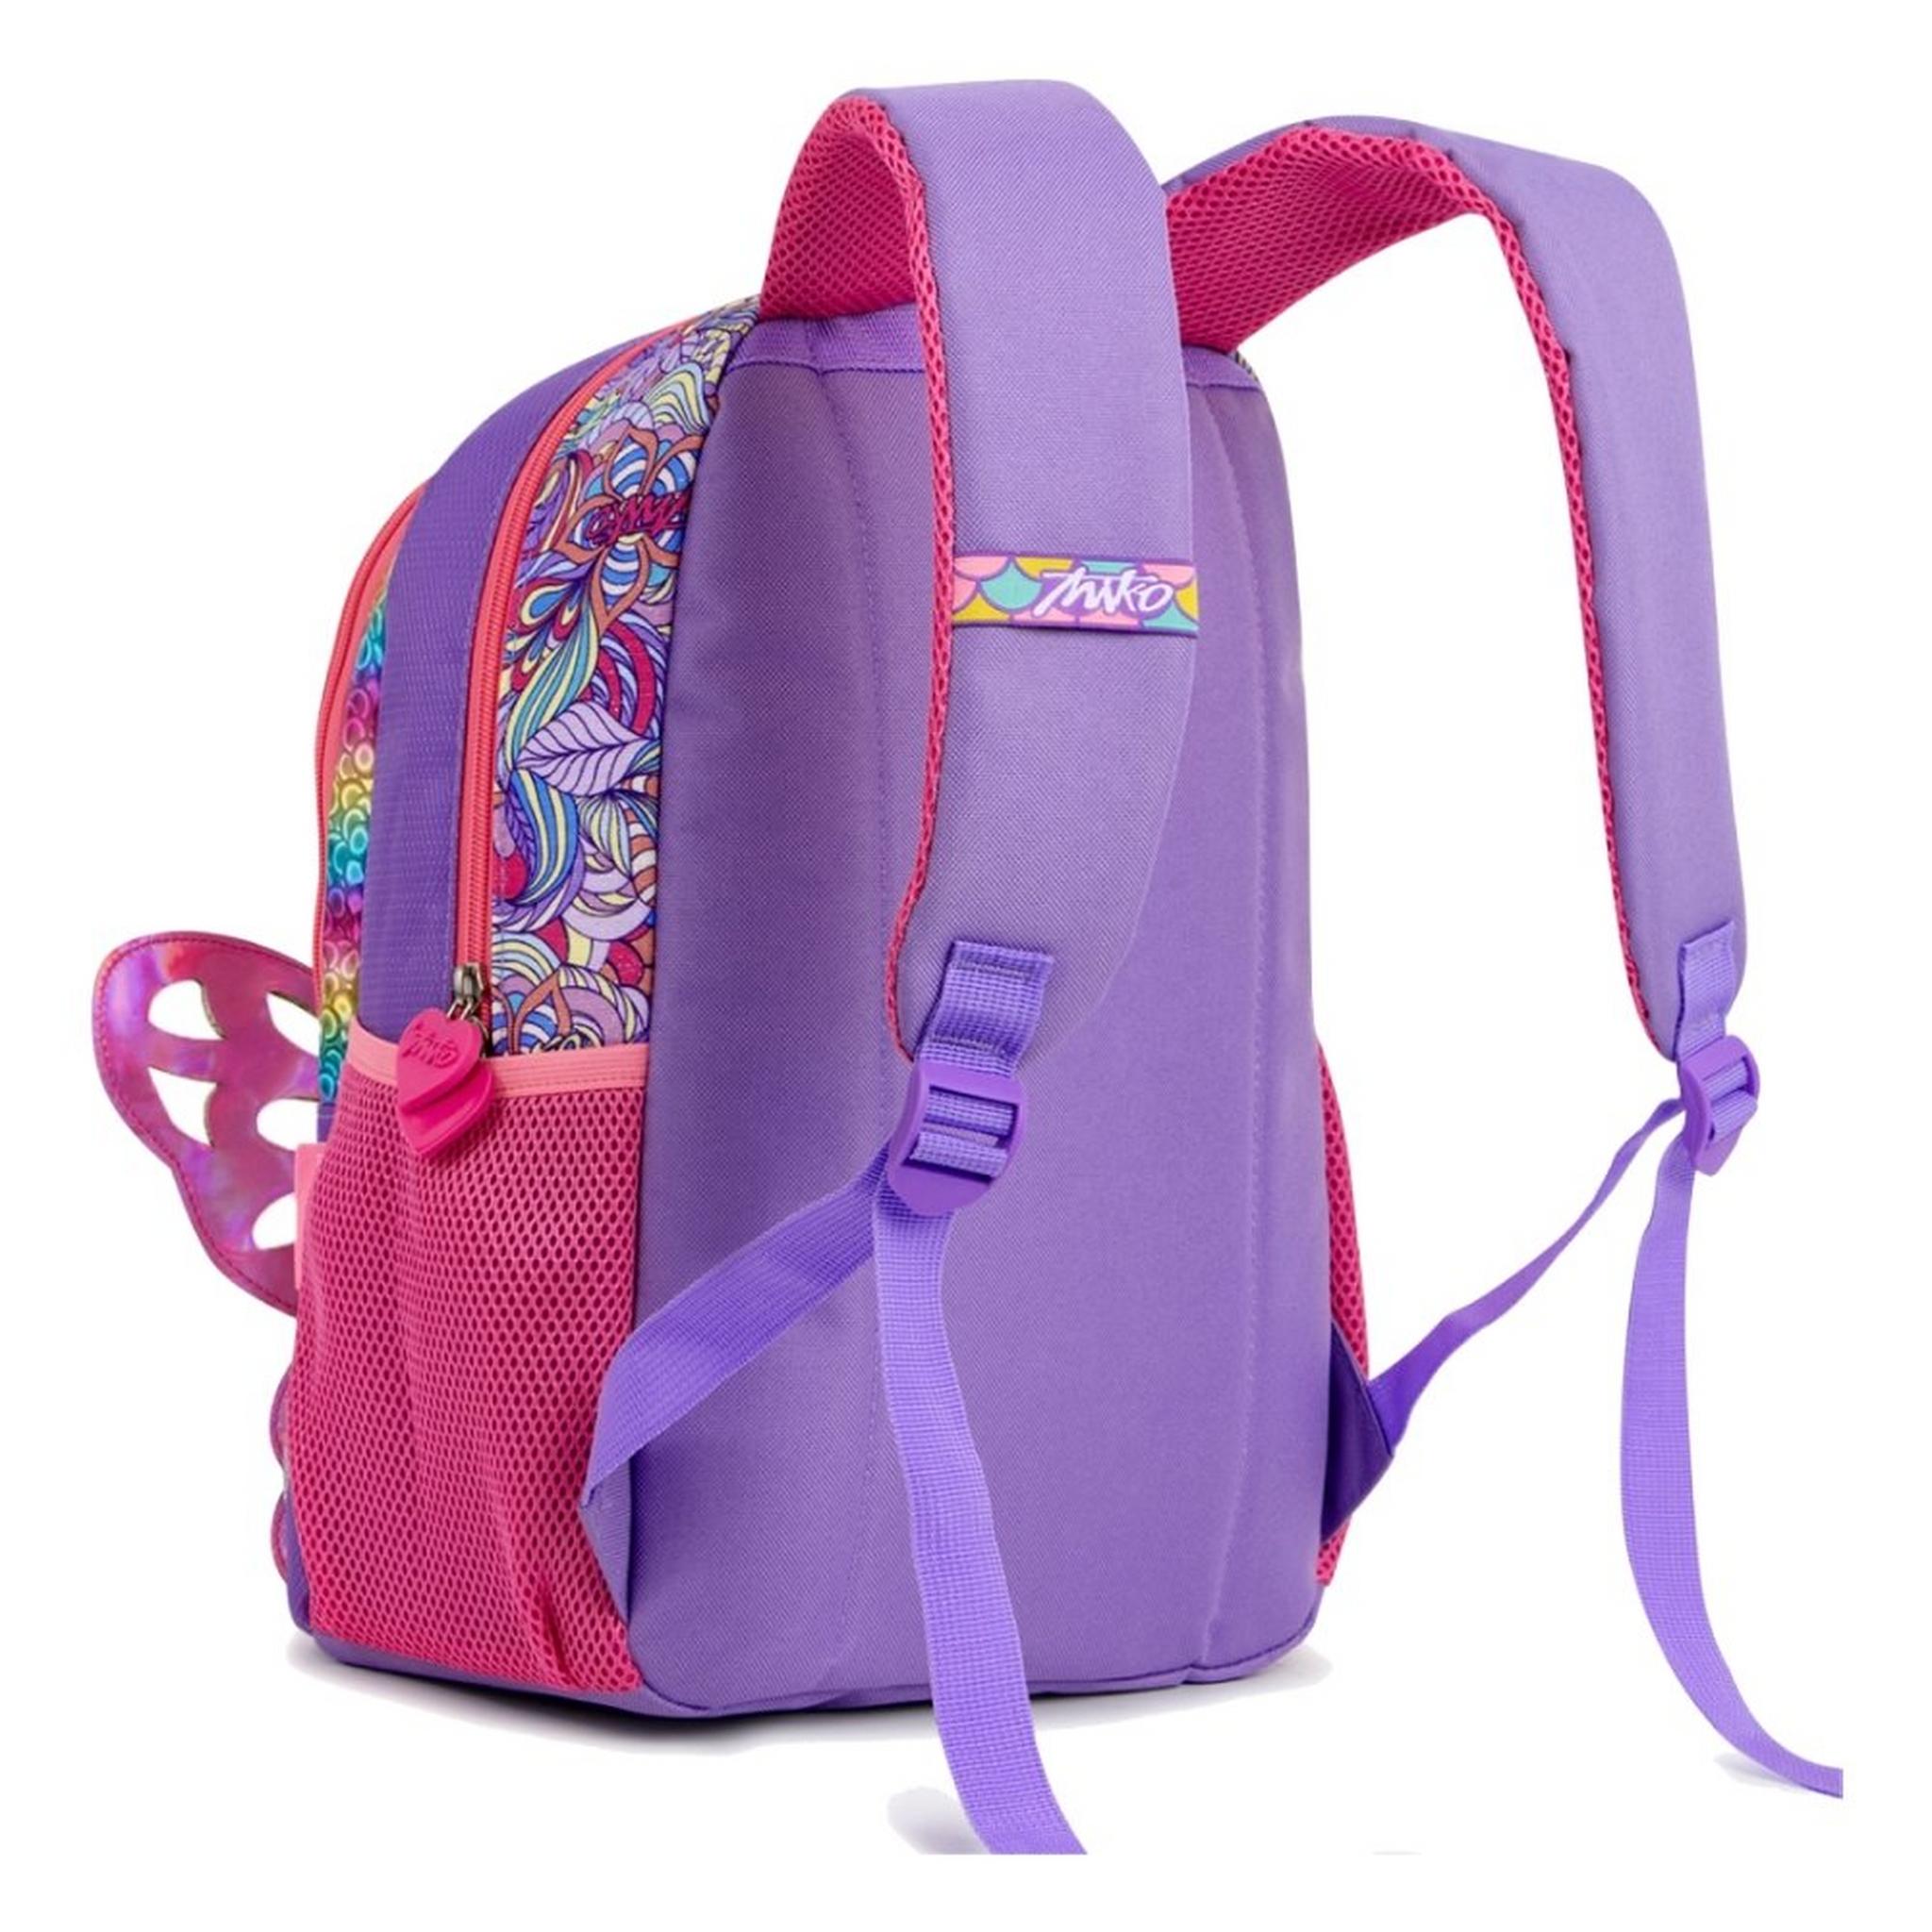 Riwbox Butterfly Backpack - Purple